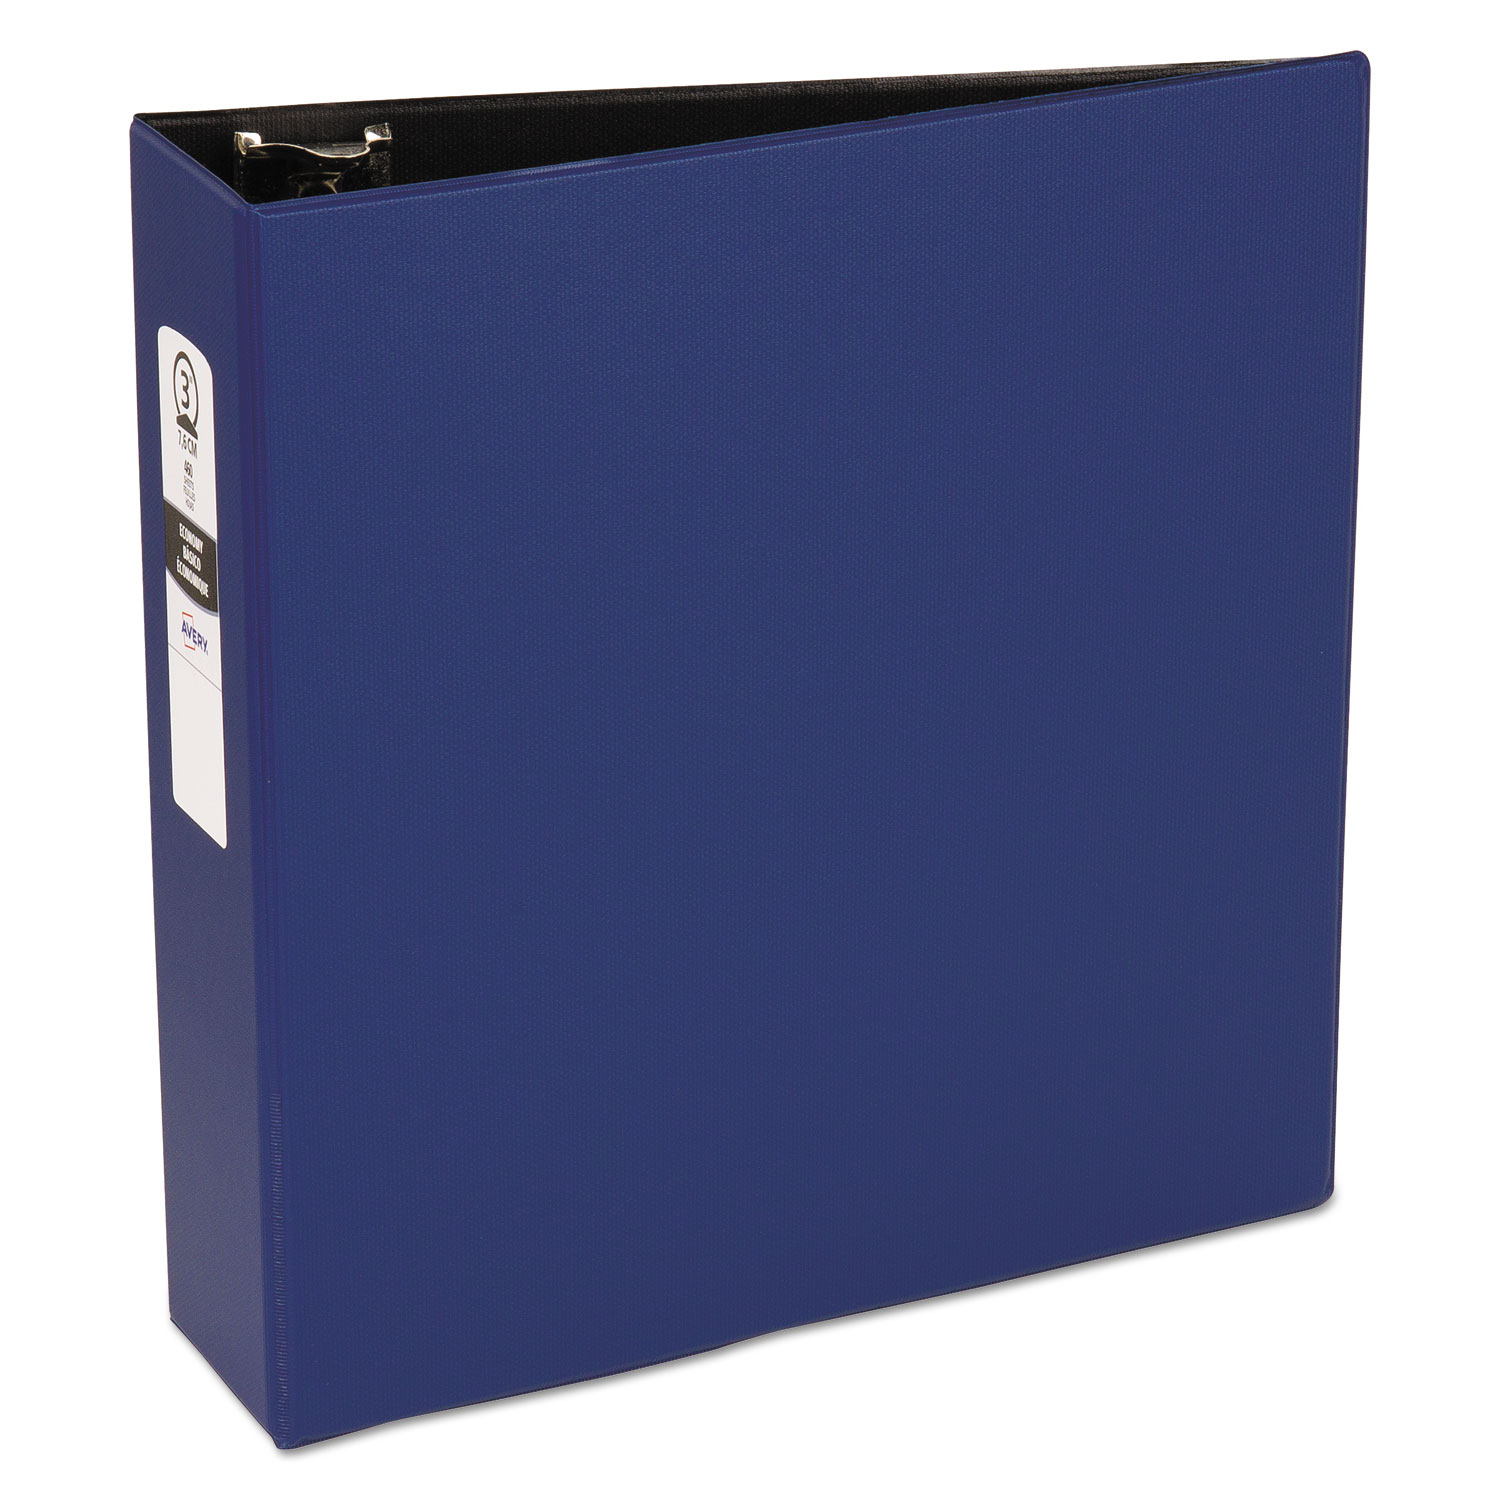  Avery 03601 Economy Non-View Binder with Round Rings, 3 Rings, 3 Capacity, 11 x 8.5, Blue (AVE03601) 